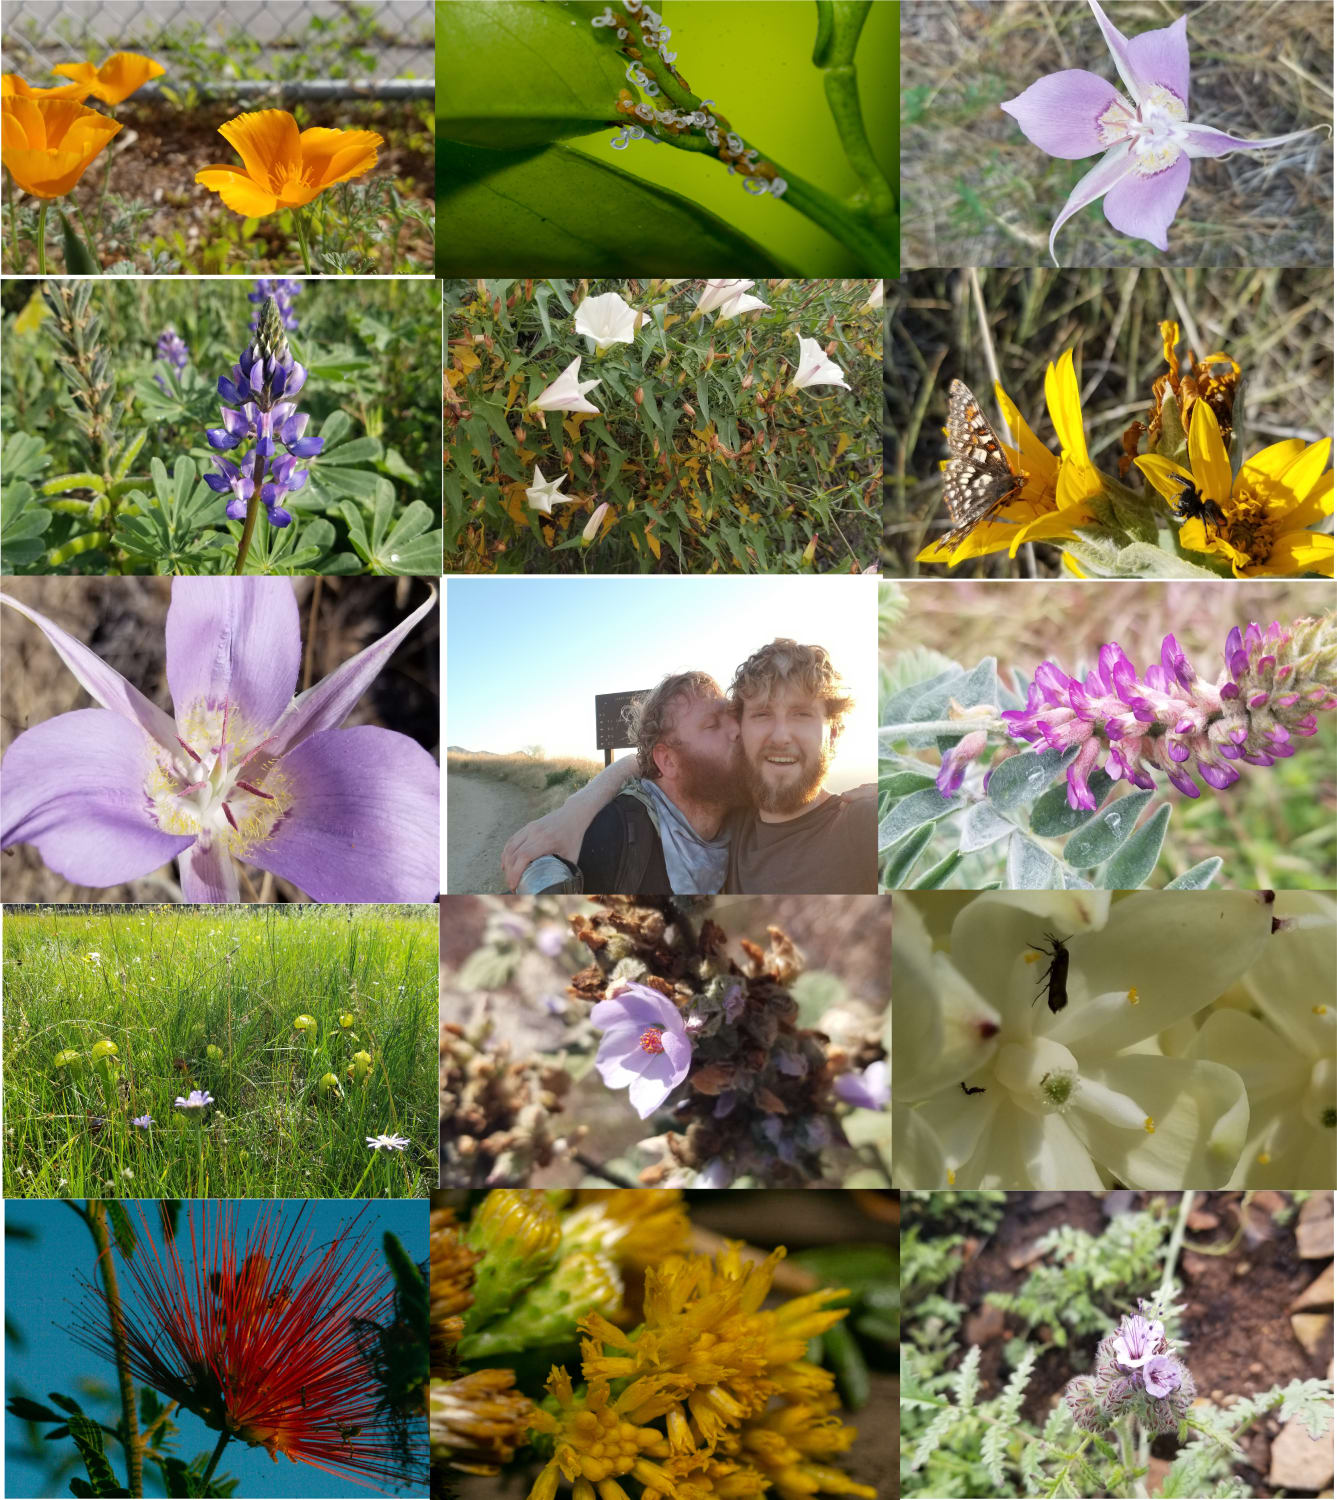 These are plants I've worked with this year as a plant ecologist, and my ever patient and kind boyfriend. I look forward to the day when I can give queer wildflowers hikes again. I miss teaching and sharing my passion.